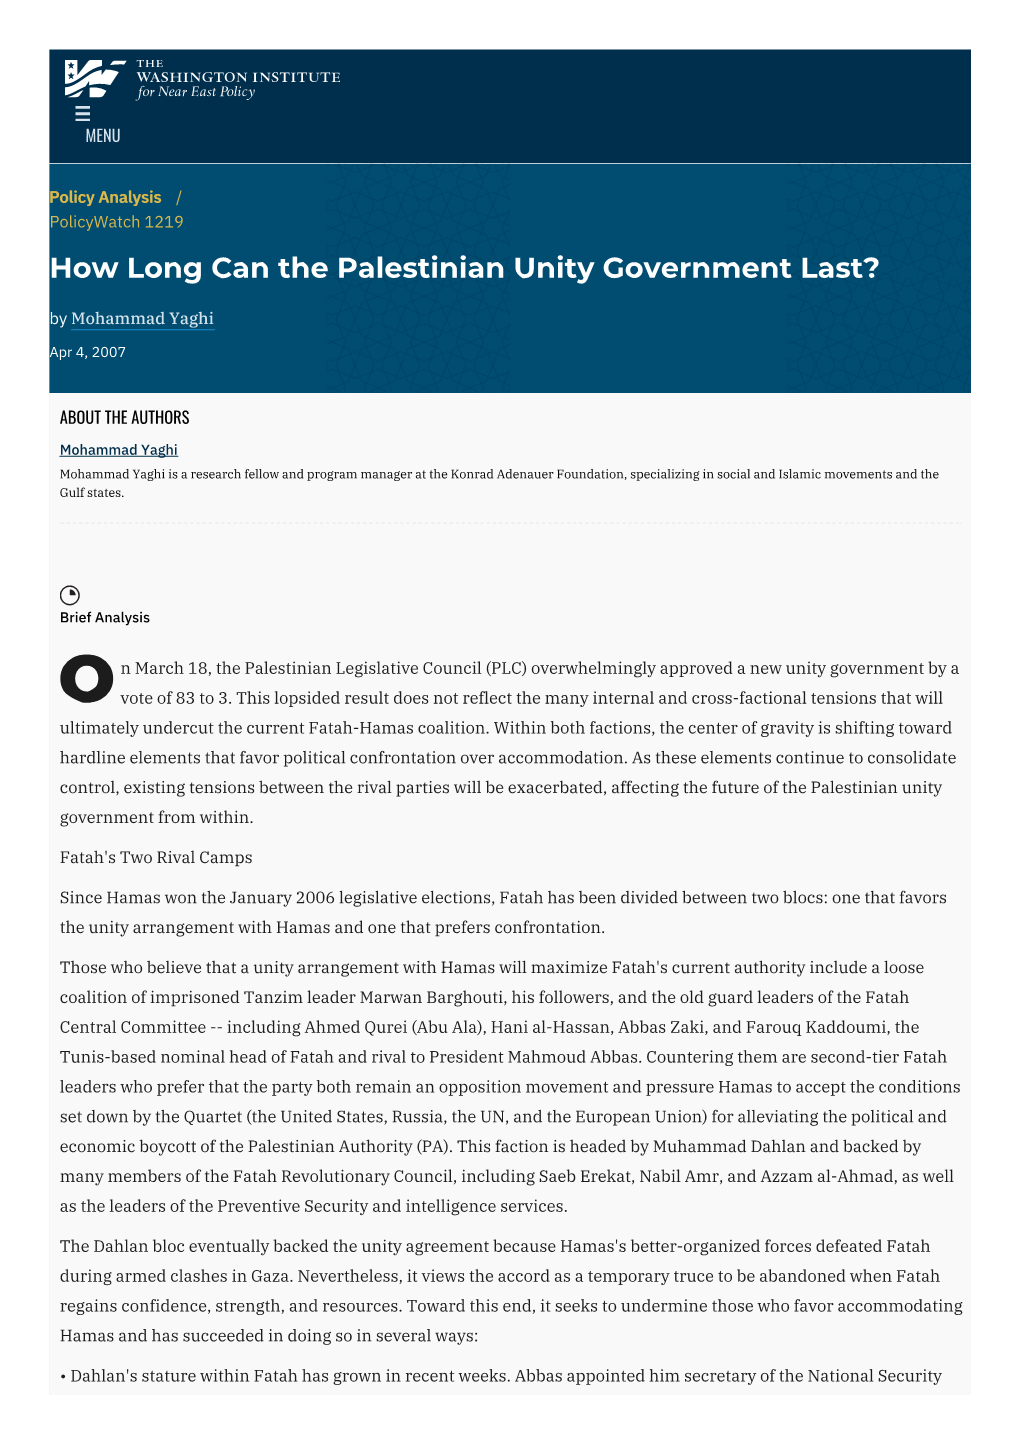 How Long Can the Palestinian Unity Government Last? | The